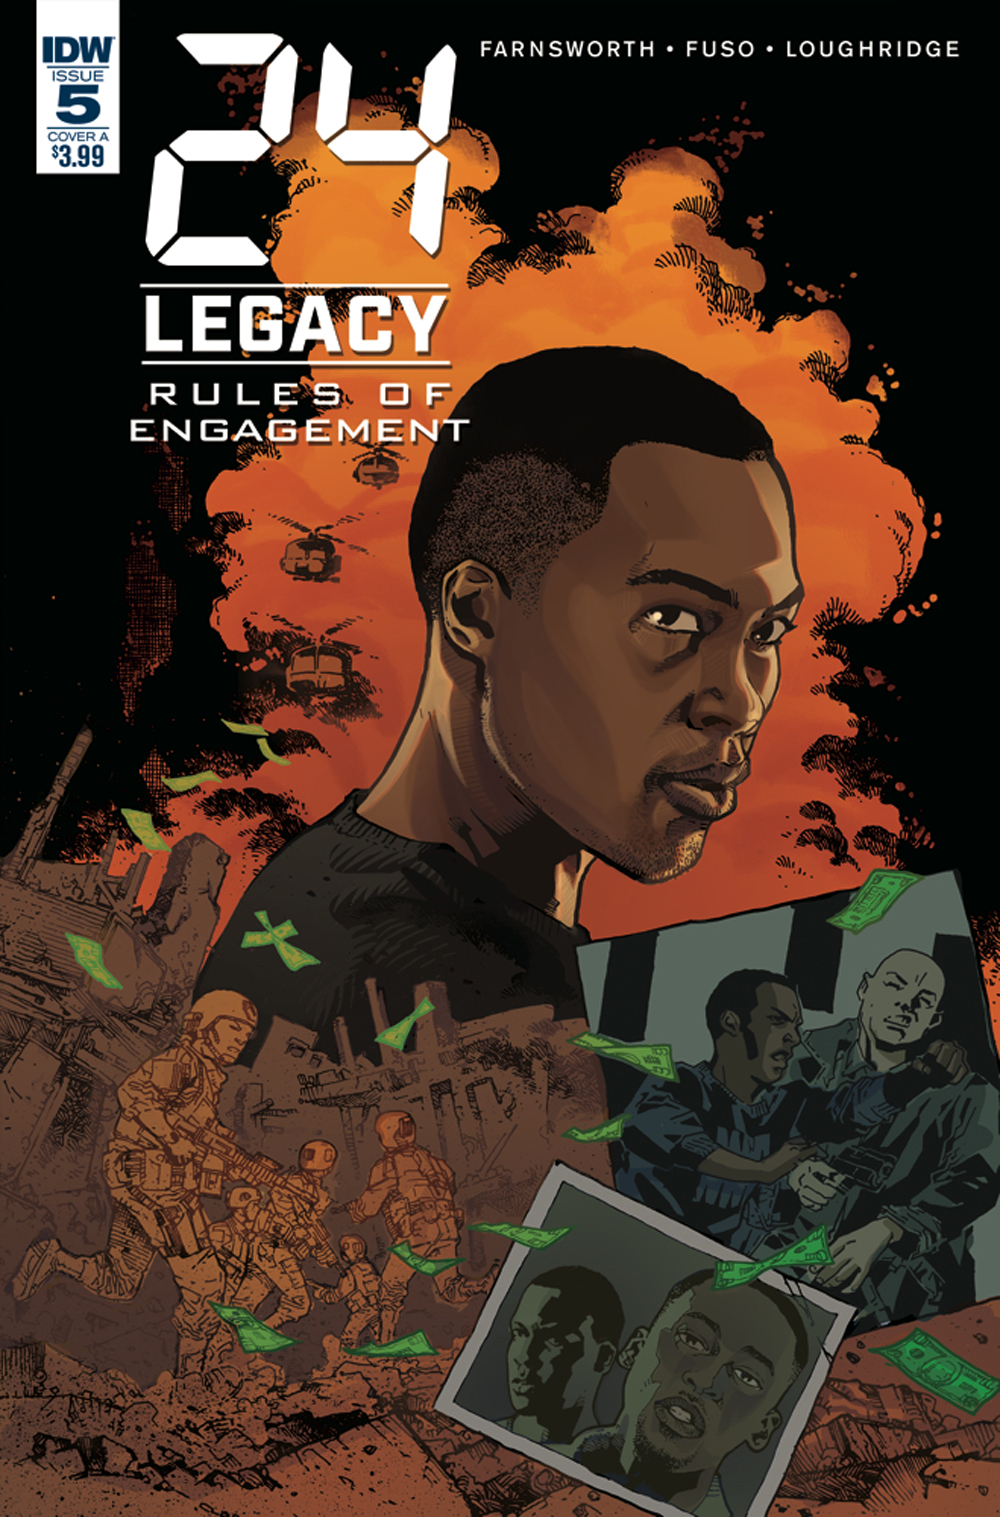 24 LEGACY RULES OF ENGAGEMENT #5 (OF 5) CVR A JEANTY